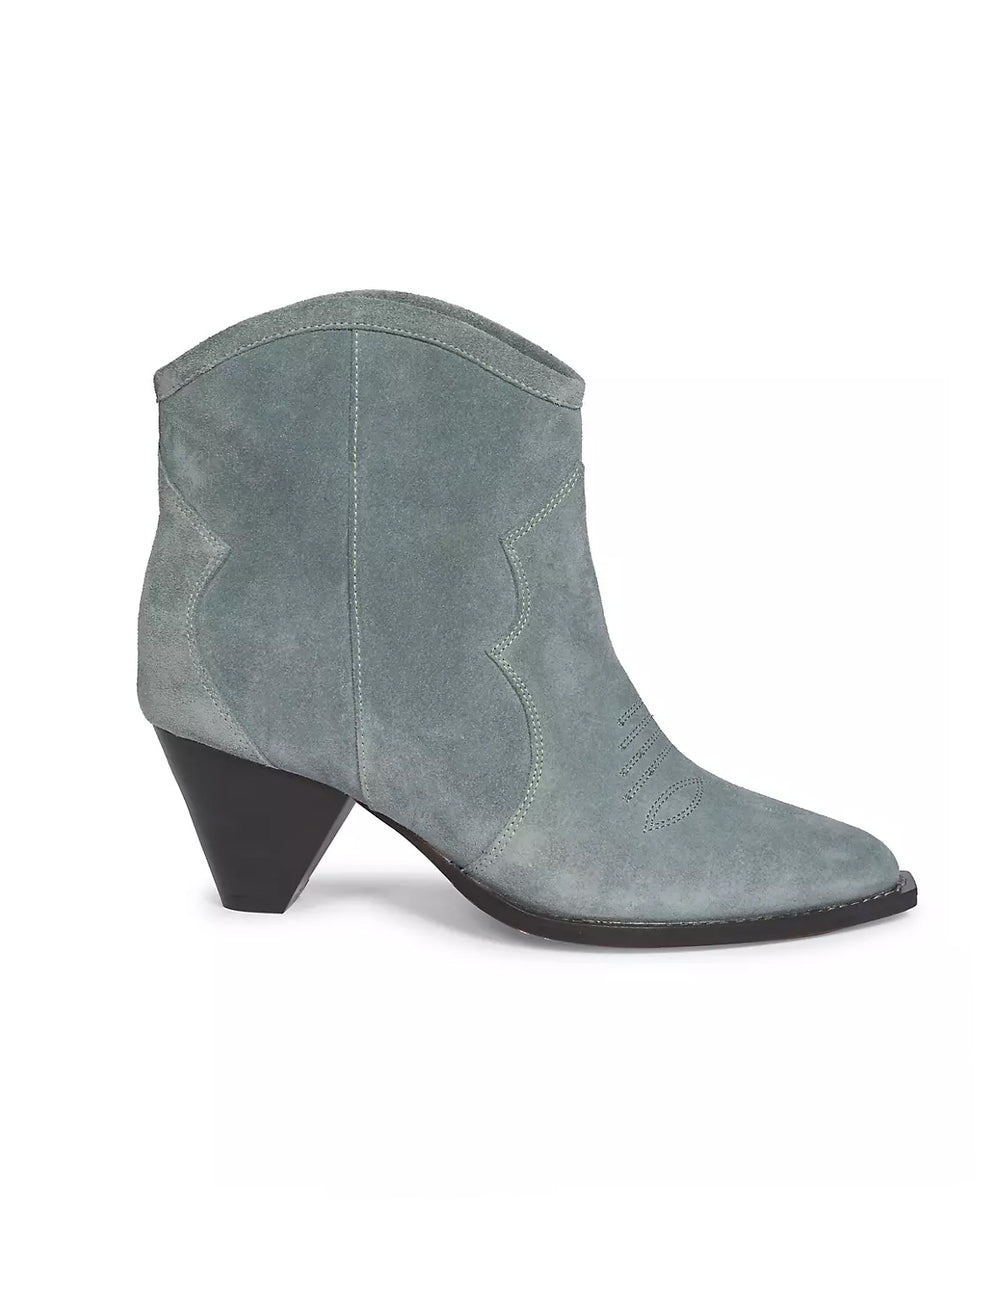 Side view of Isabel Marant Étoile's Darizo Boot in Sea Green.